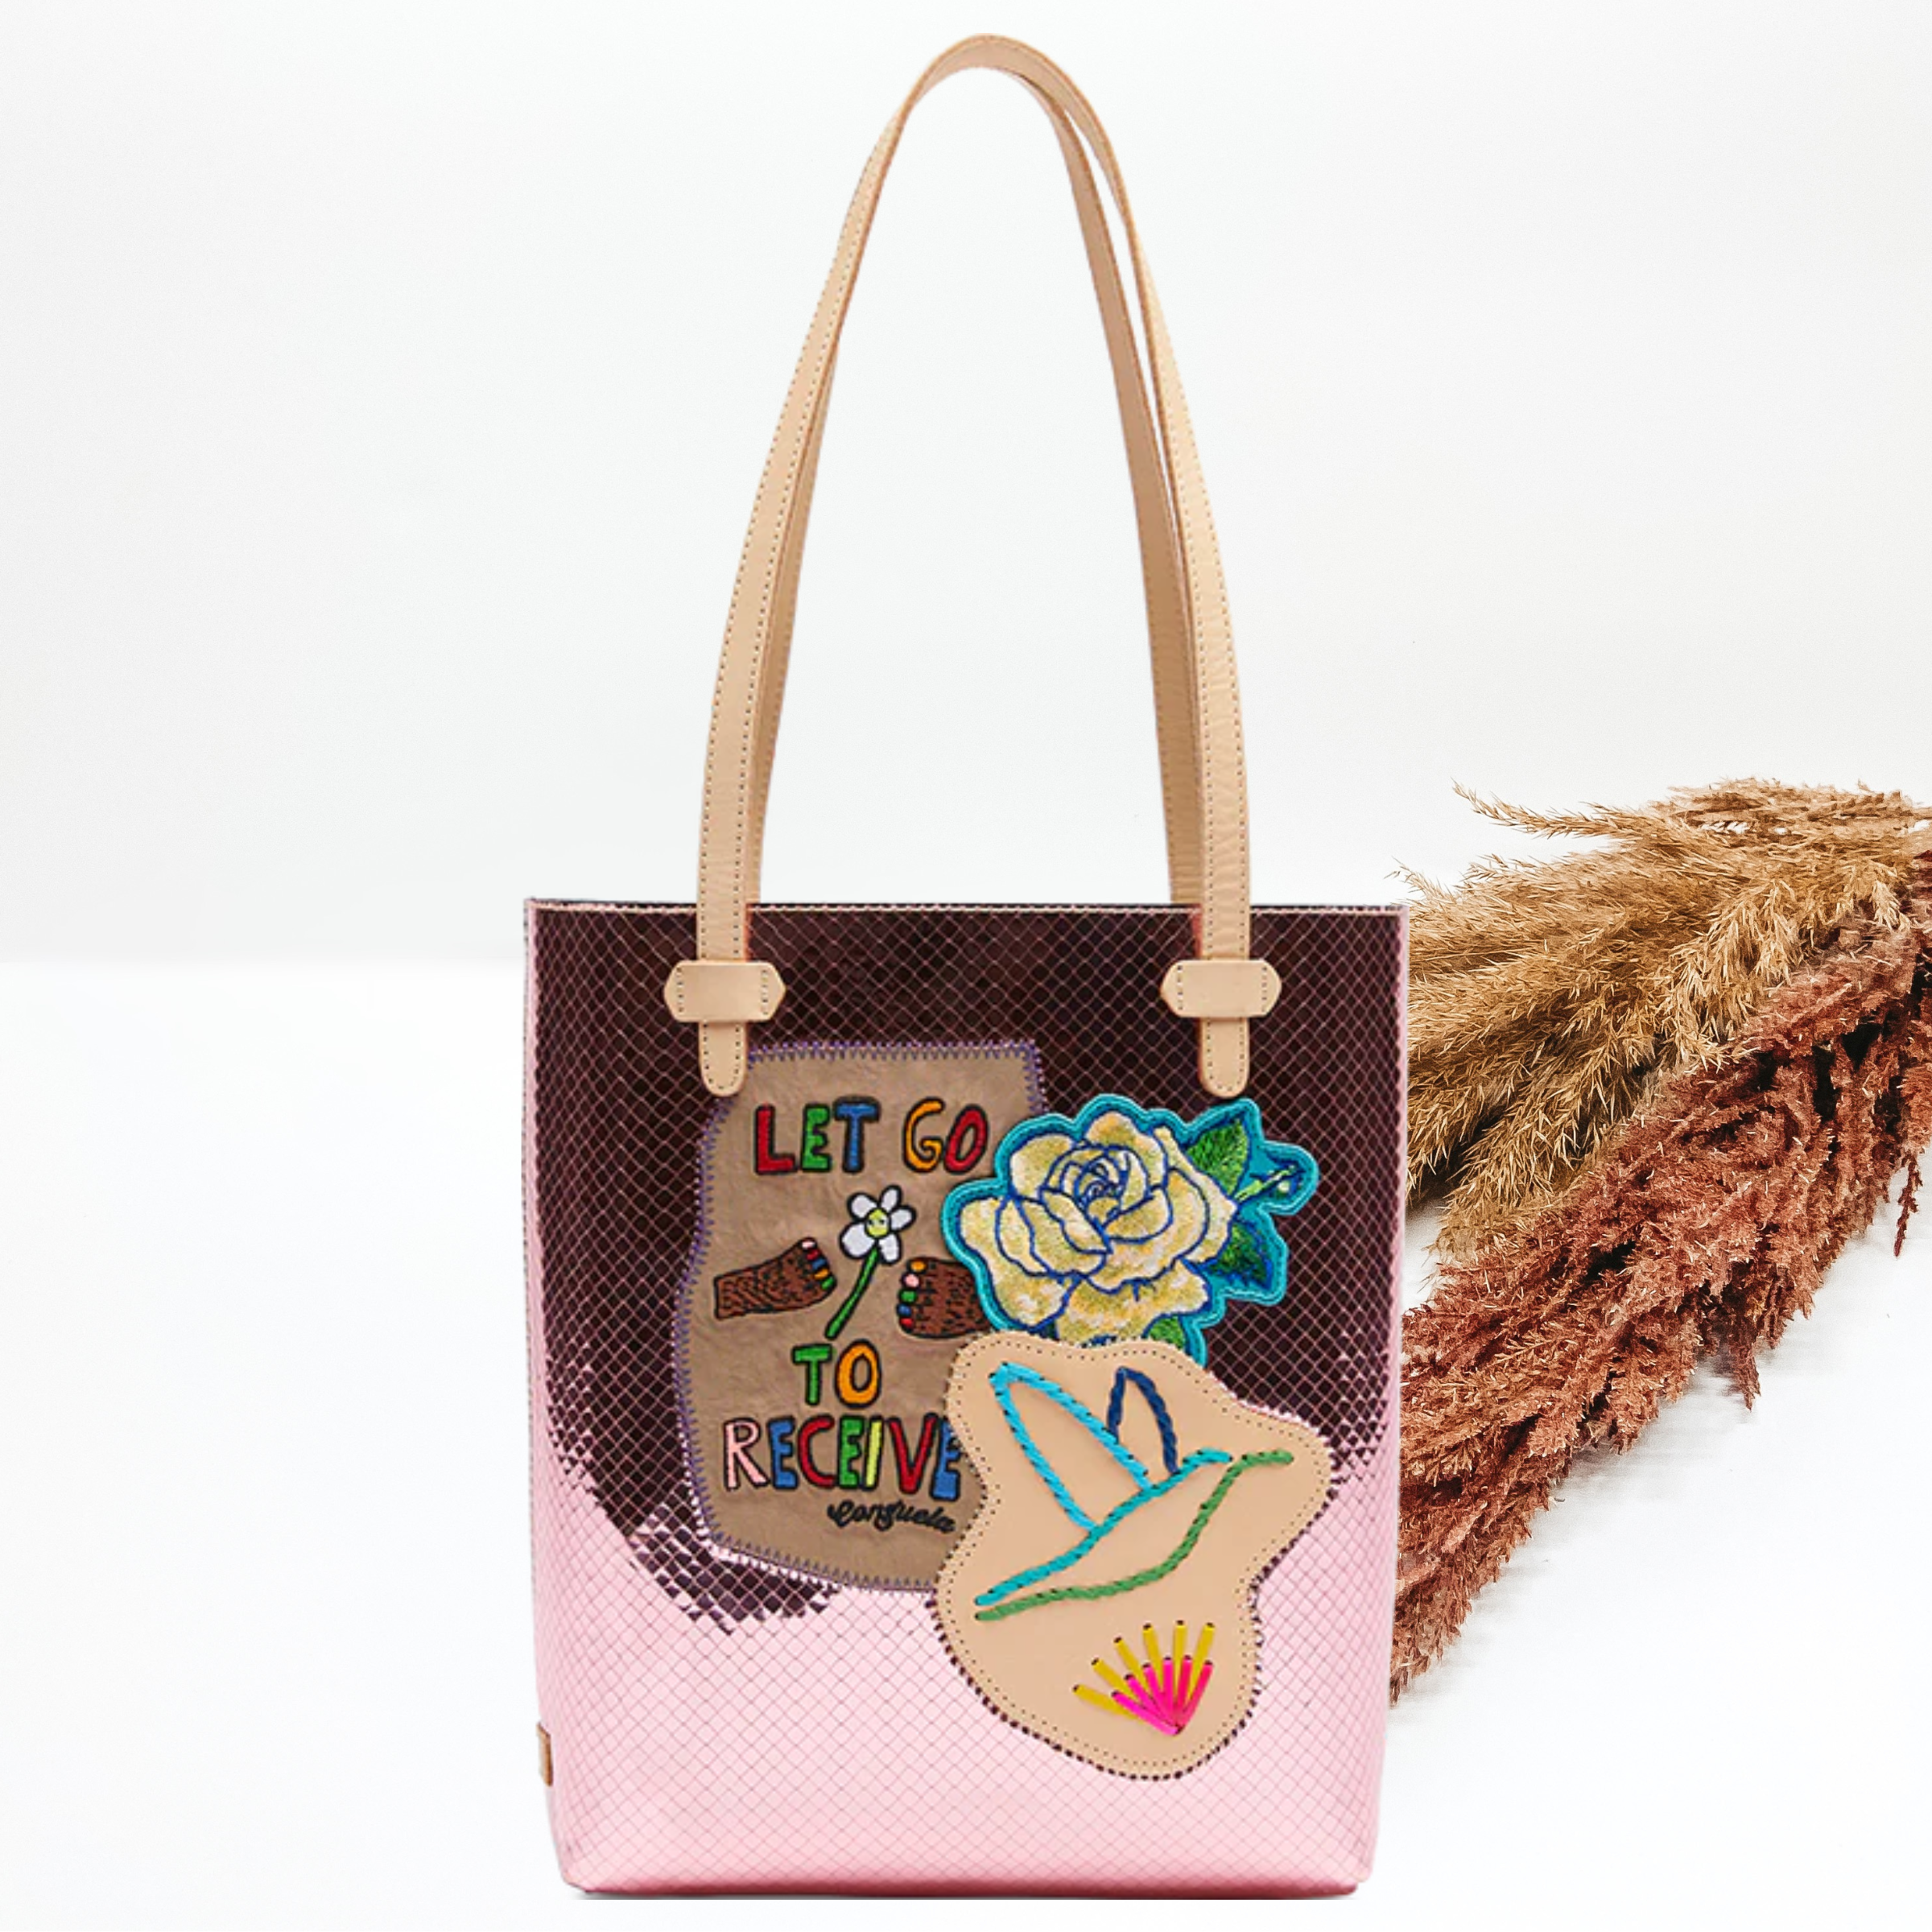 Pictured is long, rectangle tote that has a metallic pink color with a woven design ith light tan straps. This purse also a rose patch, and tan leather patch with a stitched bird, and a patch with the words "LET GO TO RECEIVE". This purse is pictured on a white background with pompous grass on the right side of the picture.